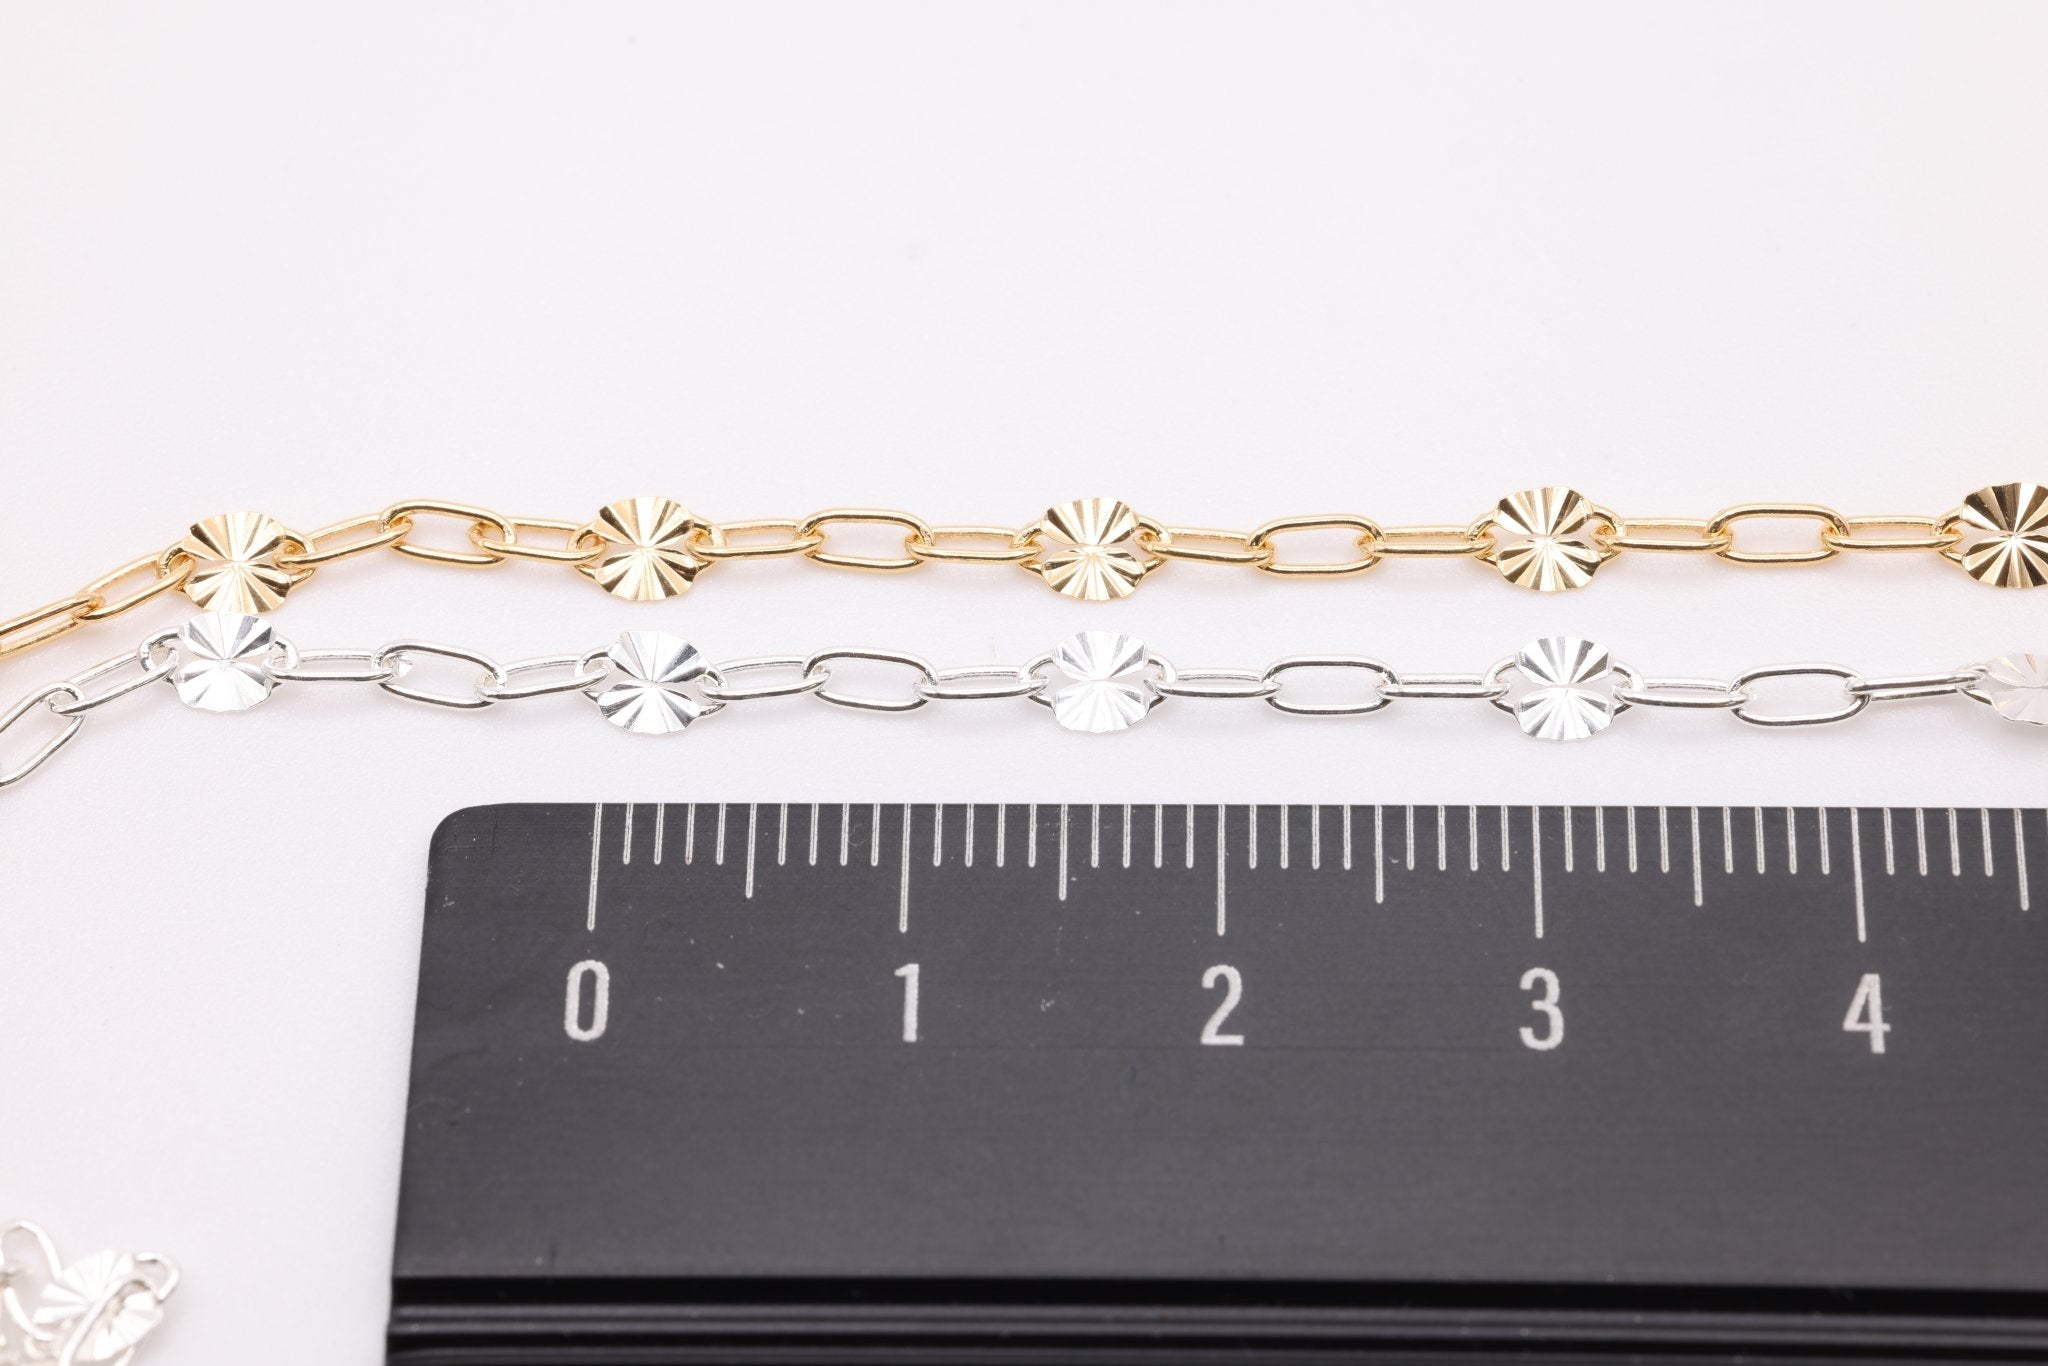 Wholesale Gold Filled Starburst Diamond Cut Chain l 2mm X 2.5mm Diamond Cut Sunburst Gold Filled Sterling Silver Chain Permanent Jewelry - HarperCrown